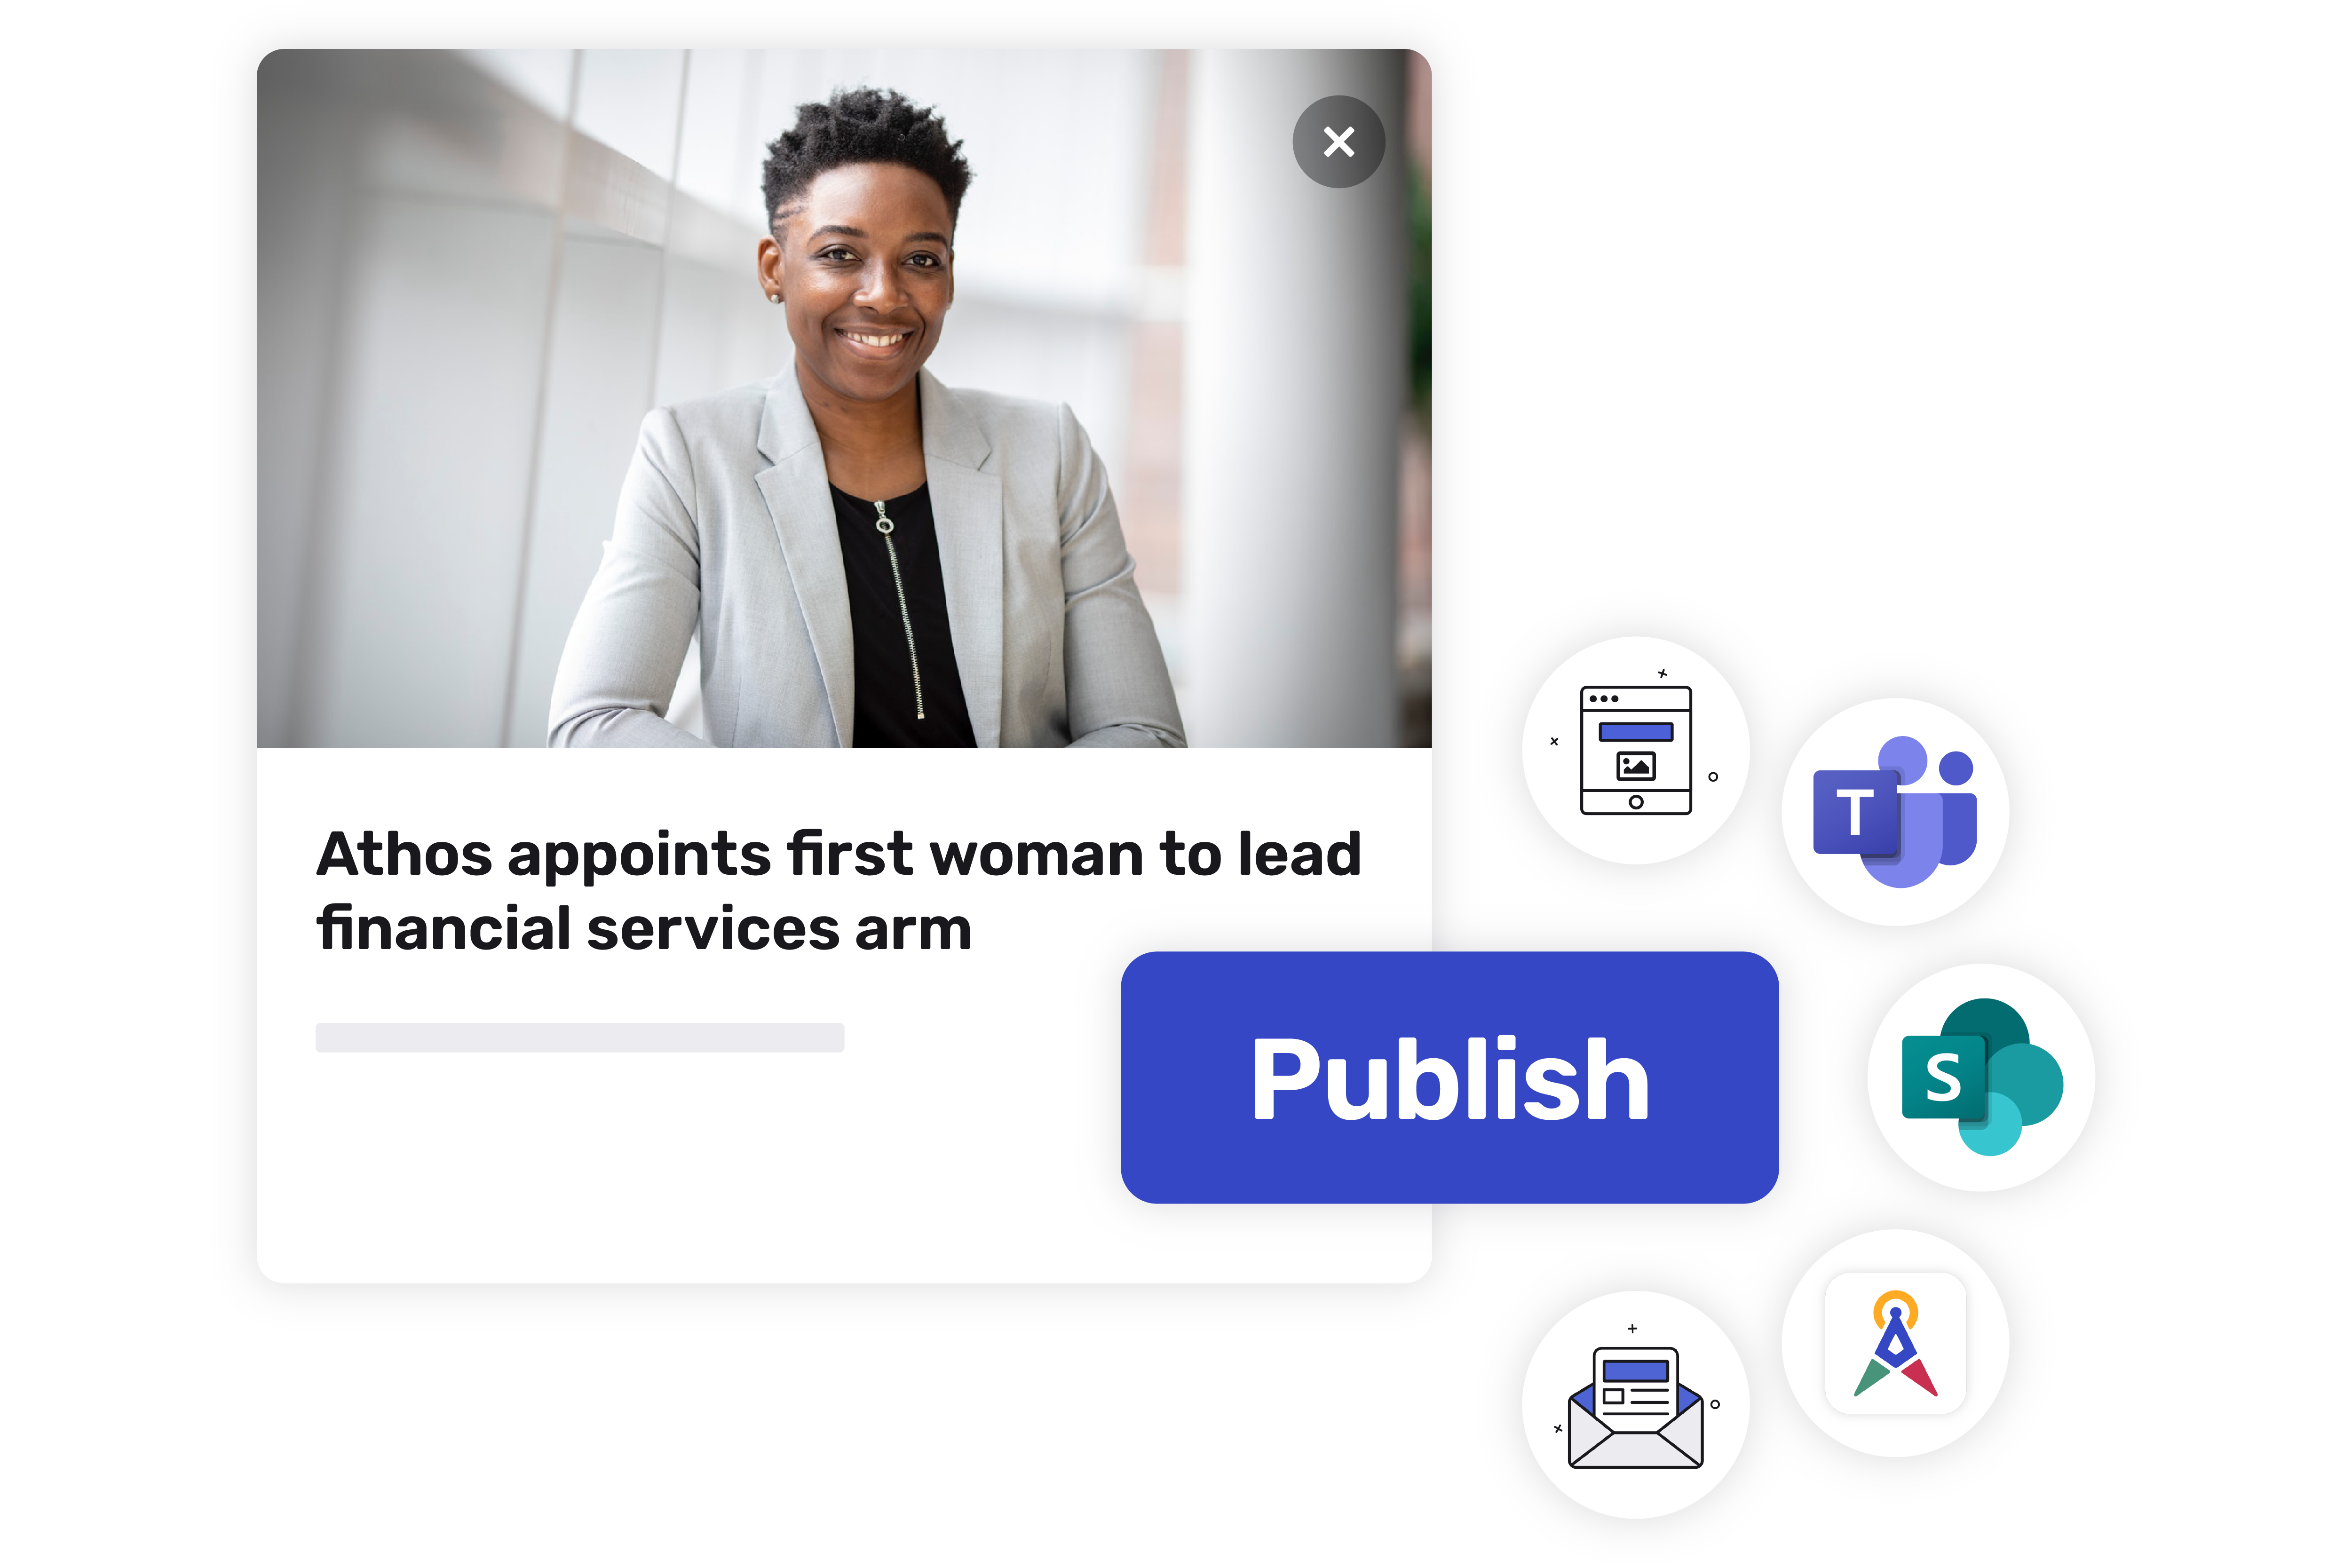 Story titled "Athos appoints first women lead to financial services arm" that's cross-published to mobile app, email, Teams, SharePoint